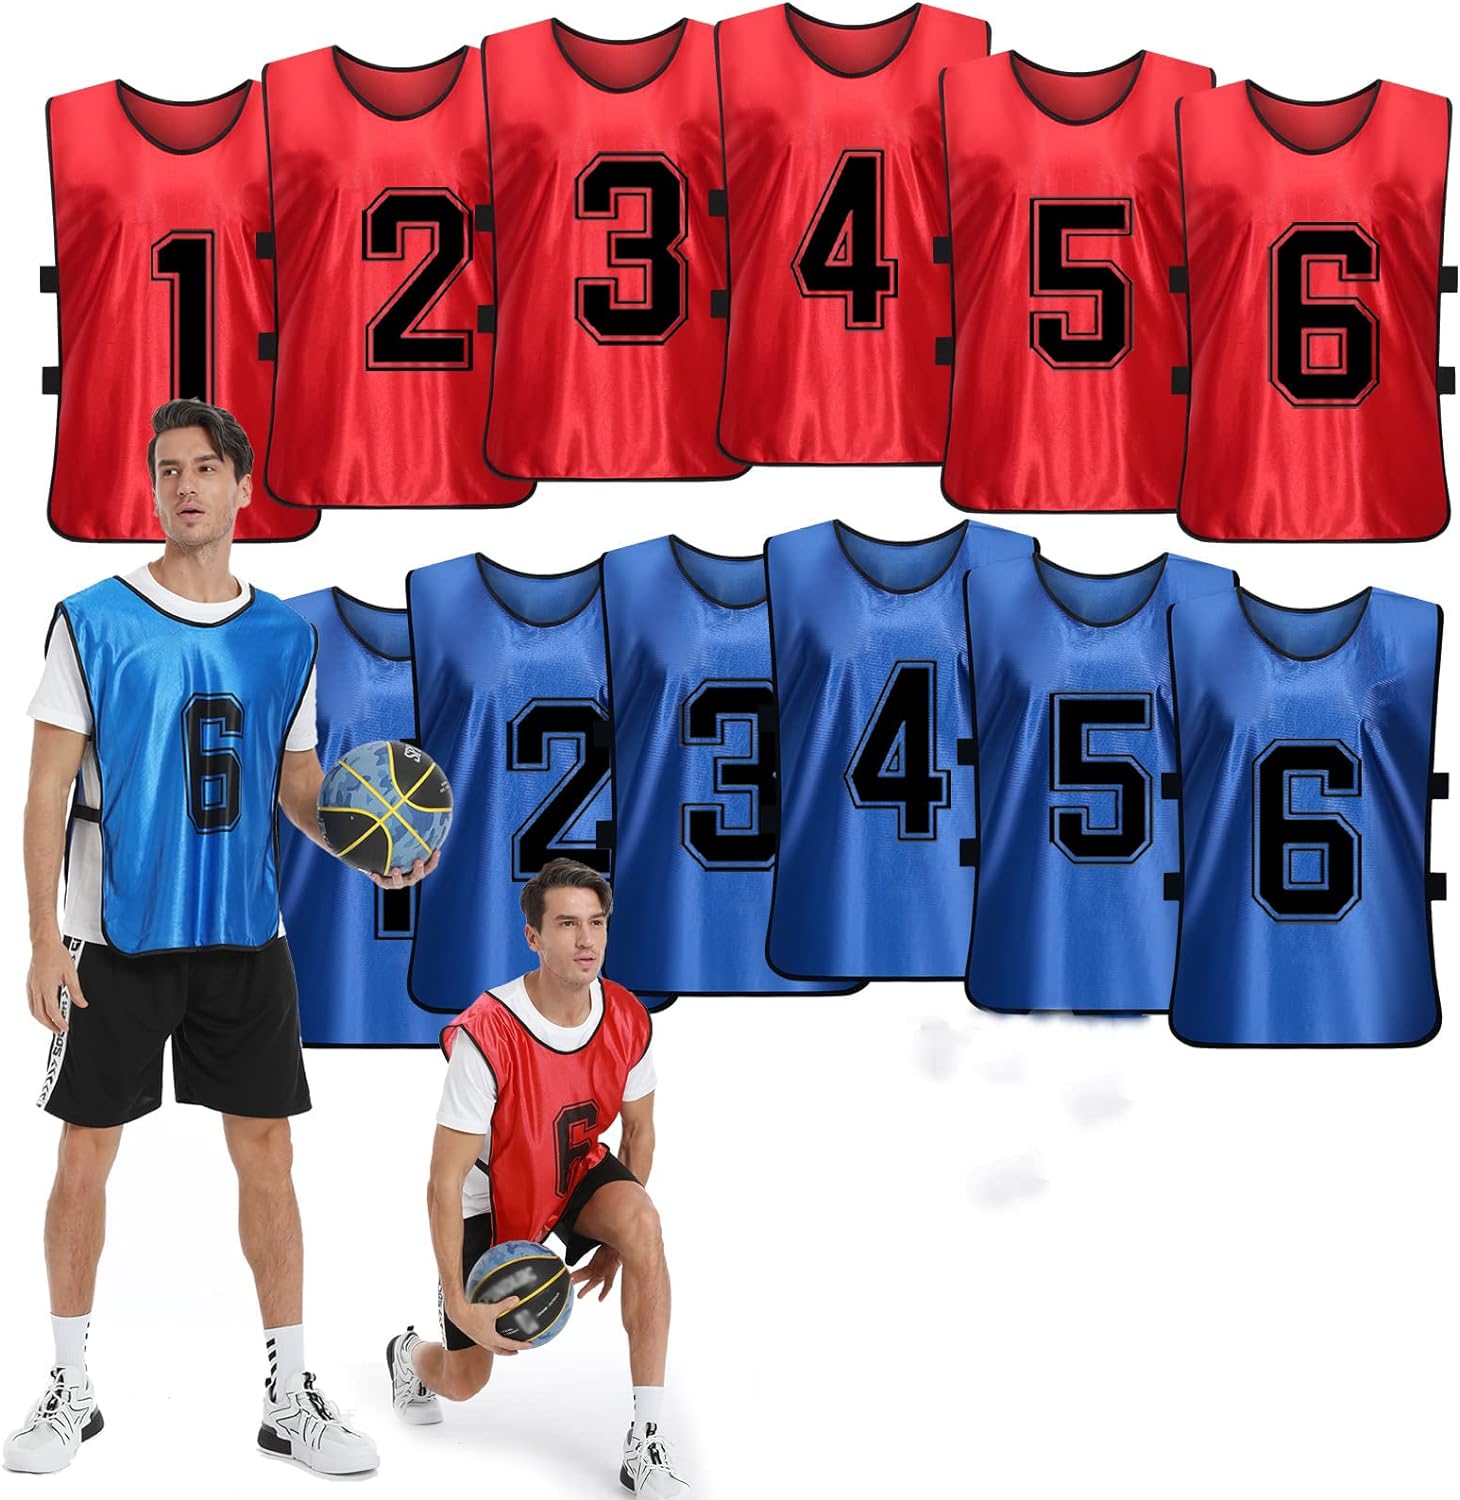 Pinnies Numbered Vest, 12 Pcs Red and Blue Two Sides Confrontation Vests for Kids-M